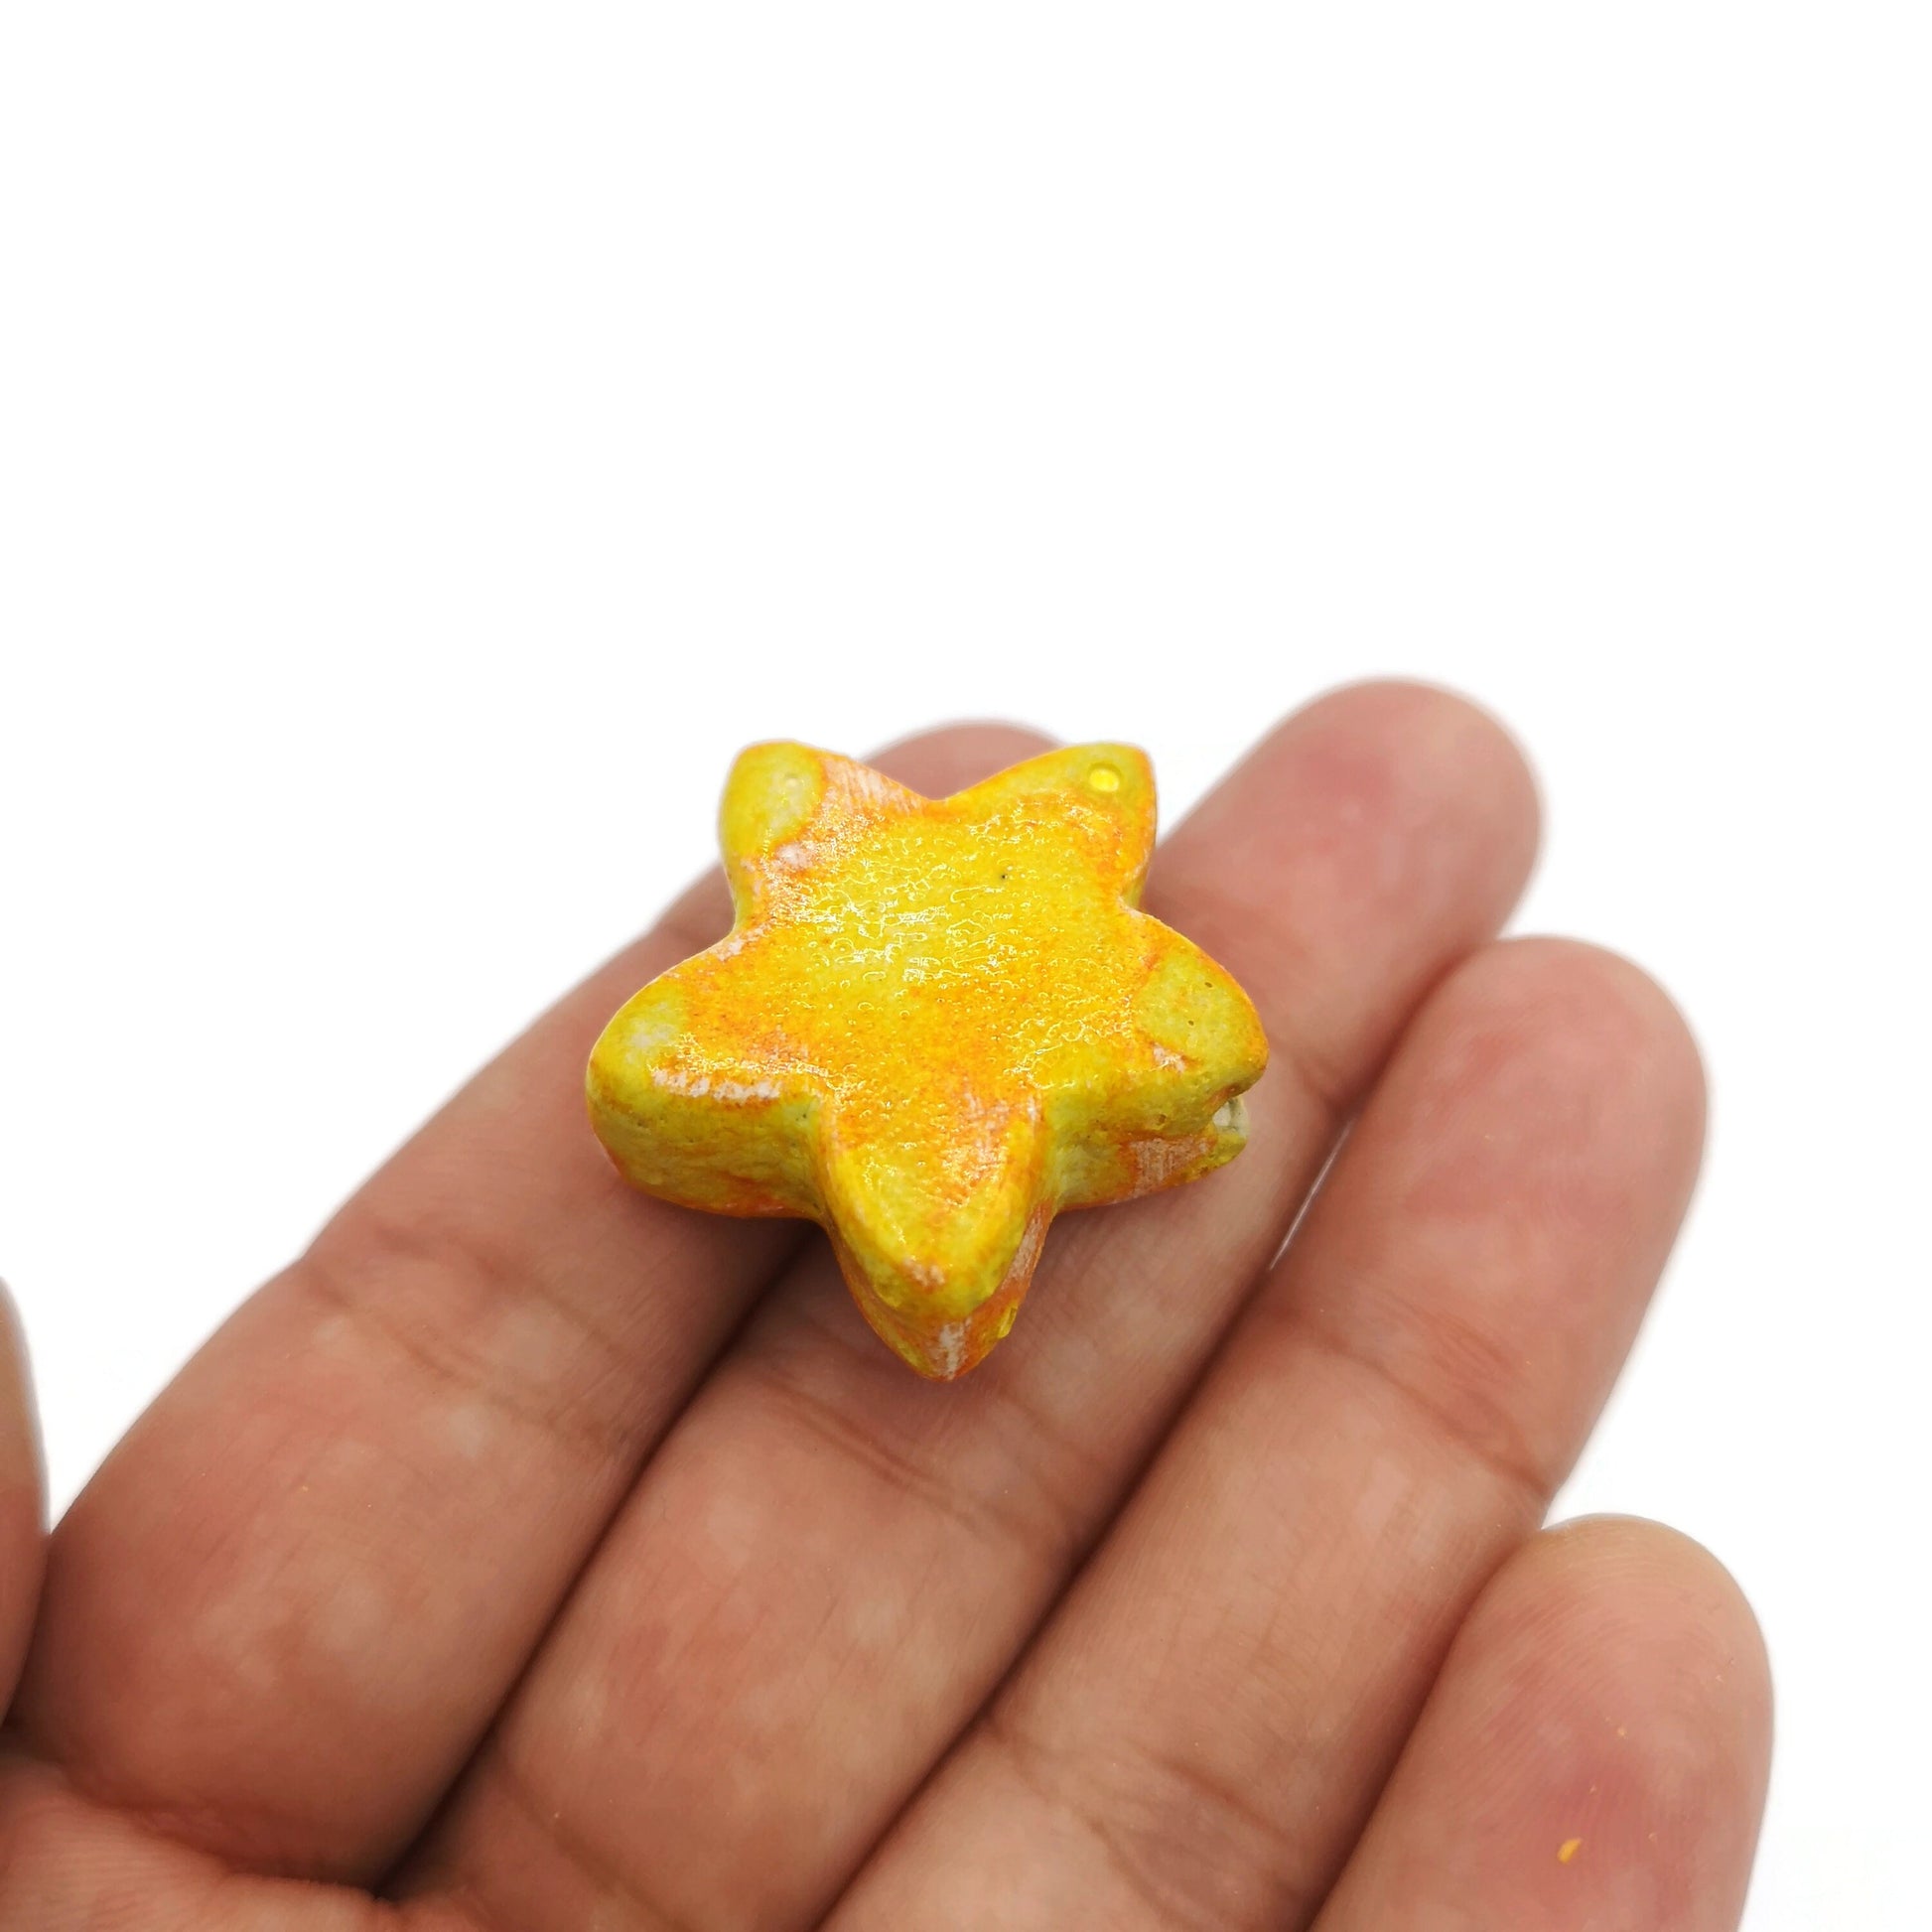 1Pc Handmade Ceramic Star Beads For Jewelry Making, Unique Clay Beads For Macrame, Large Beads, Unusual Porcelain Bead - Ceramica Ana Rafael